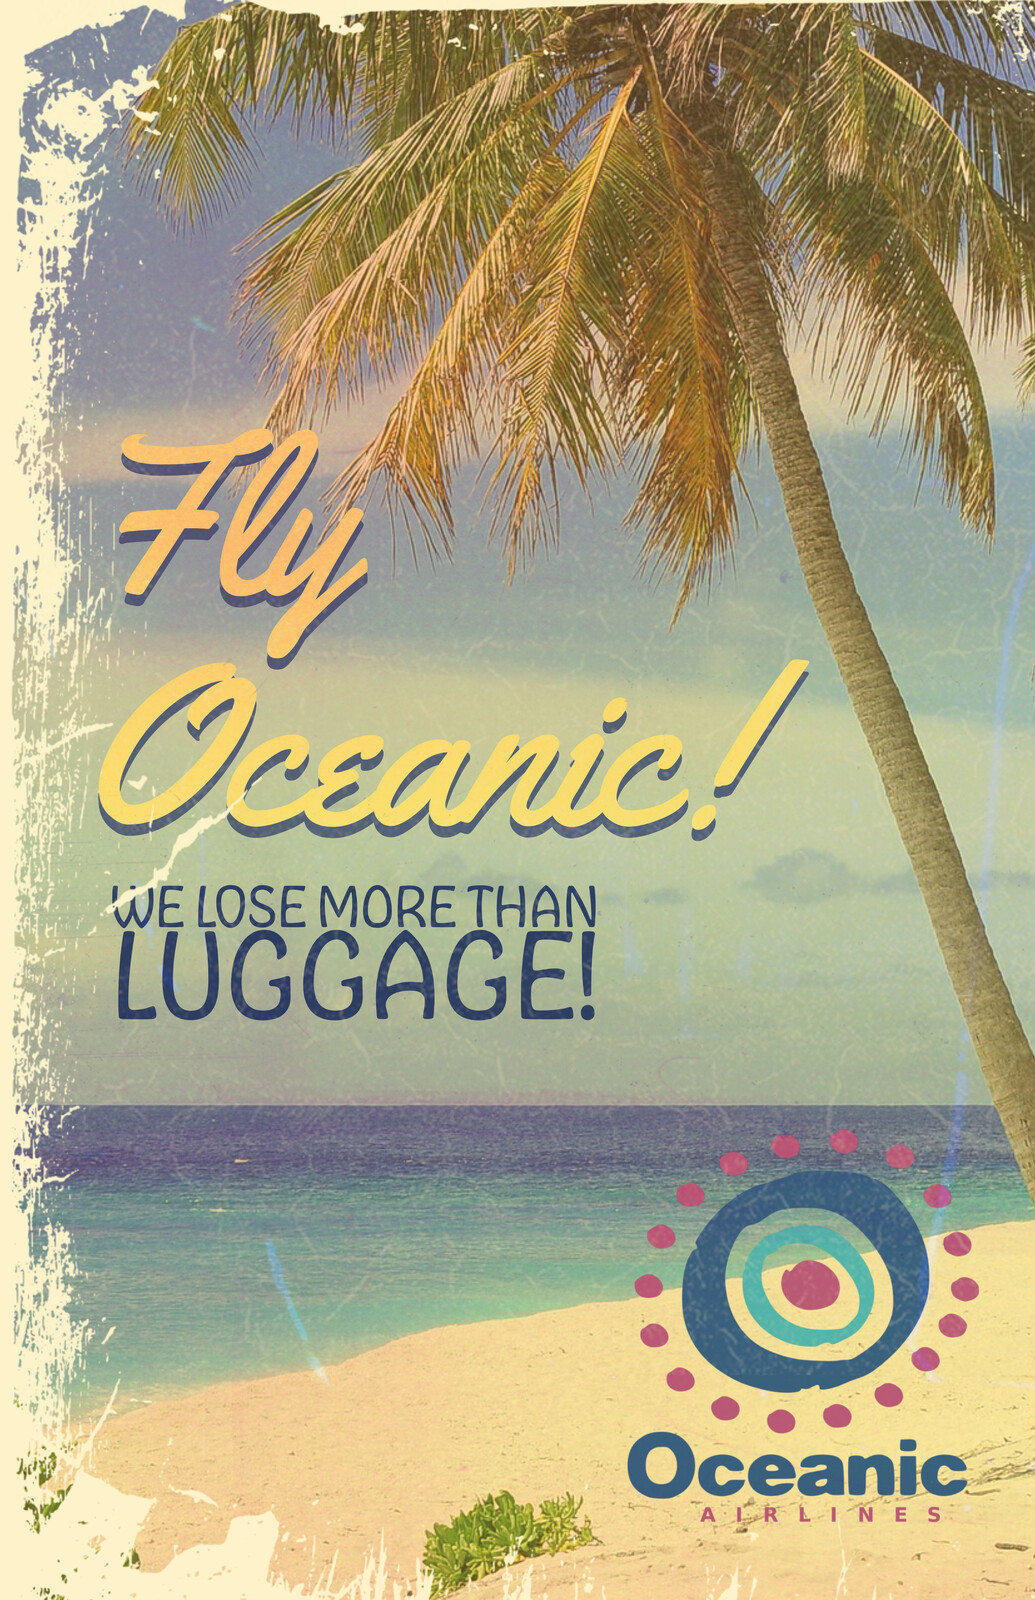 Print: Fly Oceanic! - LOST